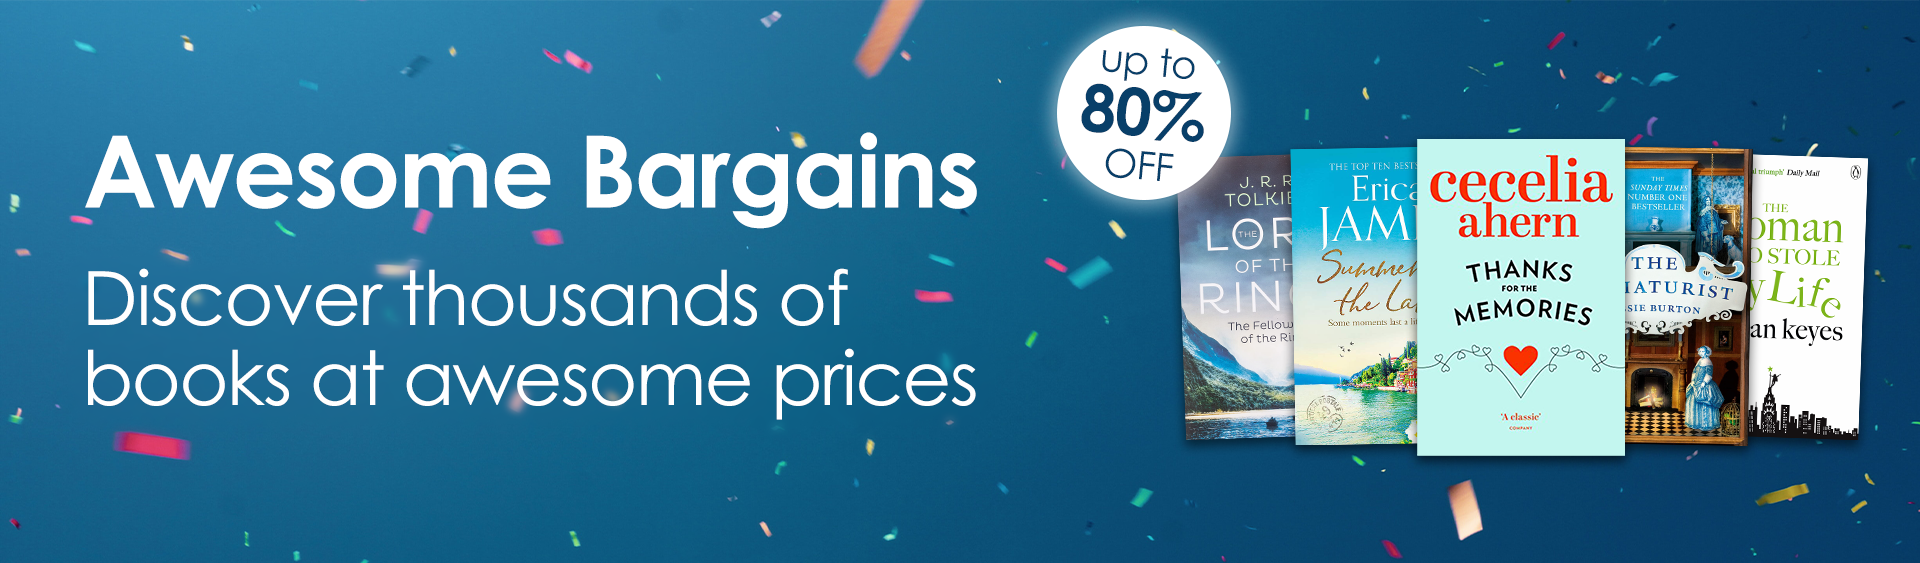 Awesome up to 80% Bargains!